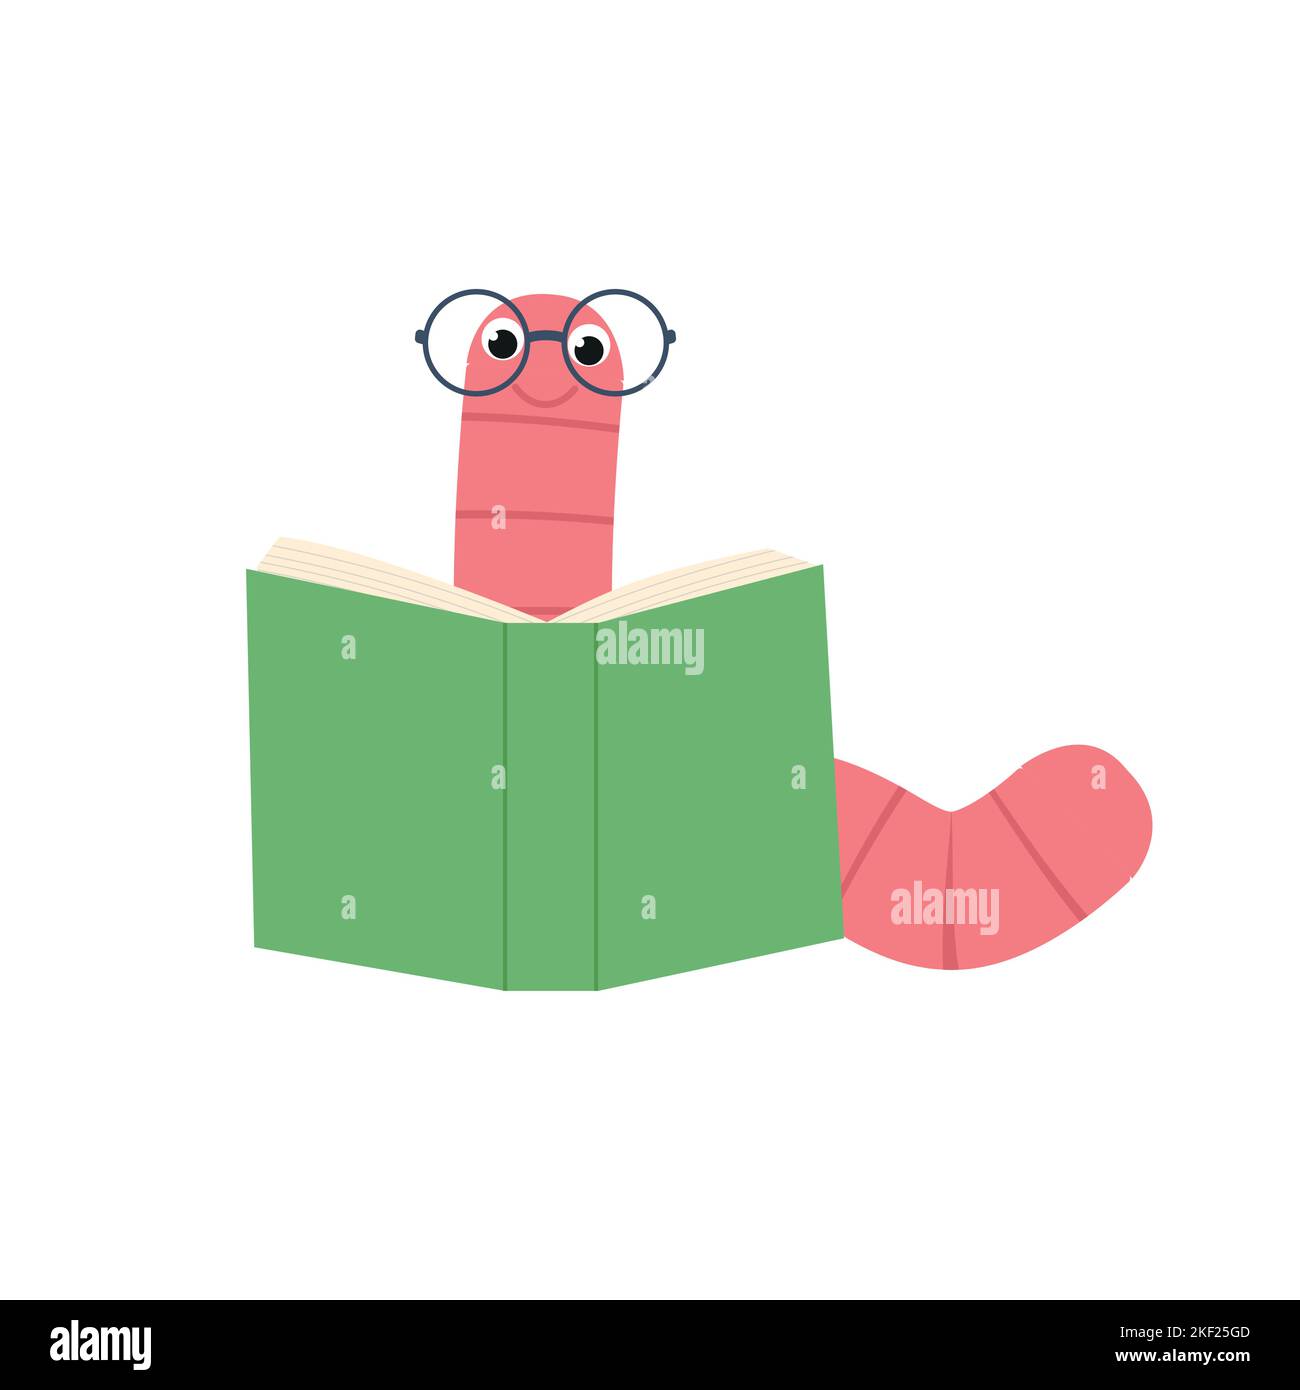 A cute caterpillar bookworm worm cute cartoon character education mascot wearing graduation hat and glasses reading a book eps 10 Stock Vector